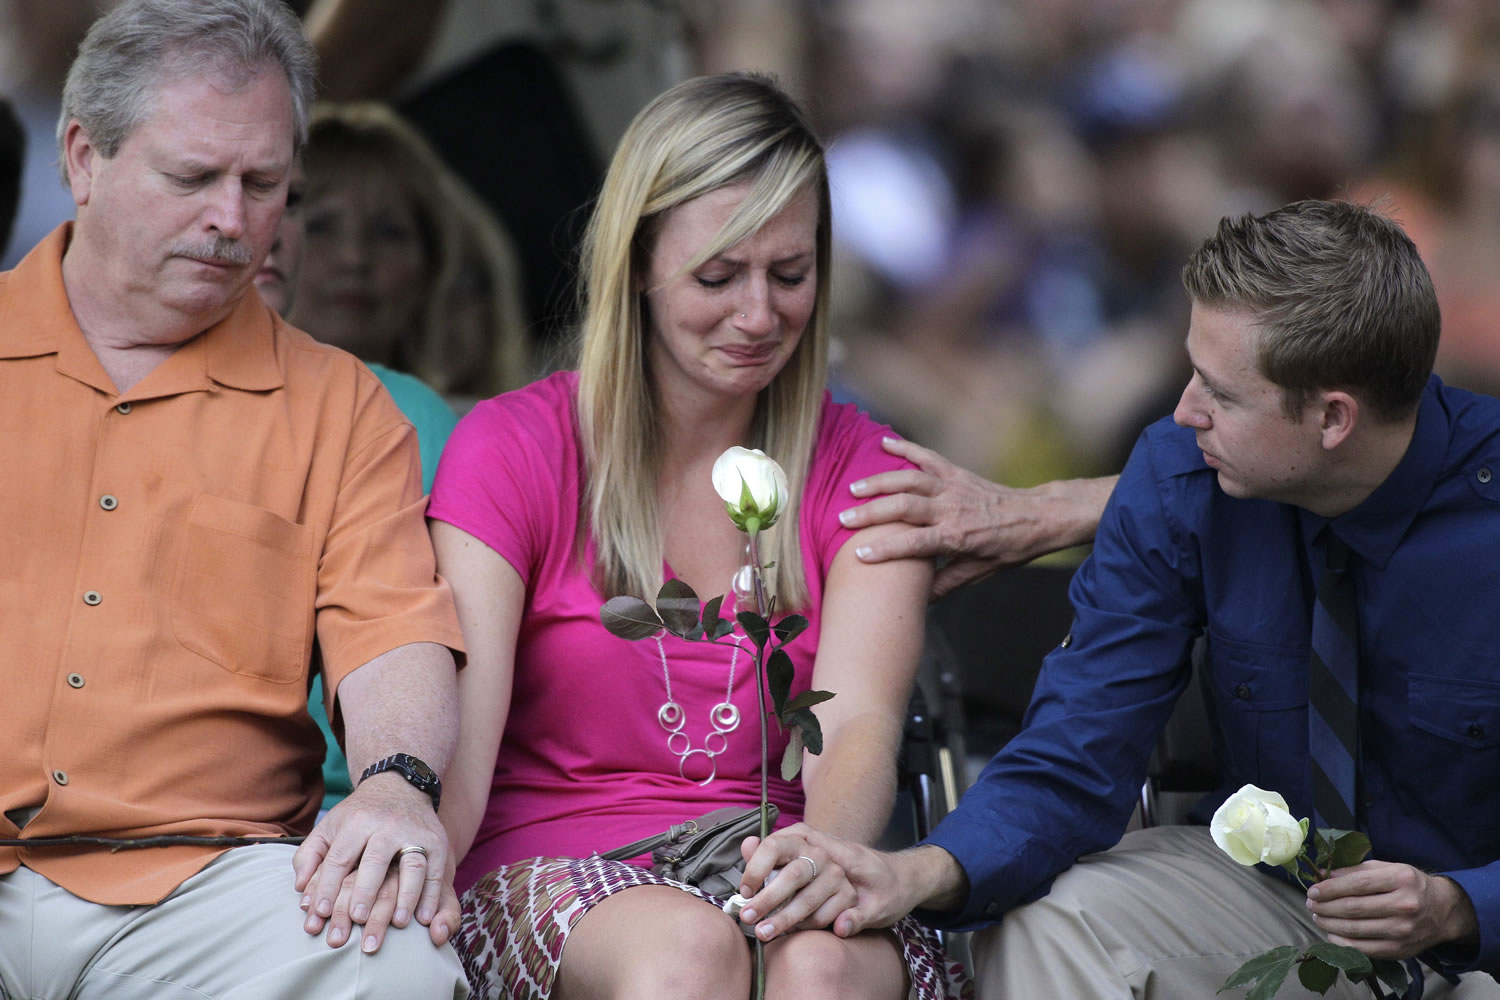 Family members of the victims of Friday's mass shooting in Aurora, Colo., comfort each other Sunday during a prayer vigil for the victims.